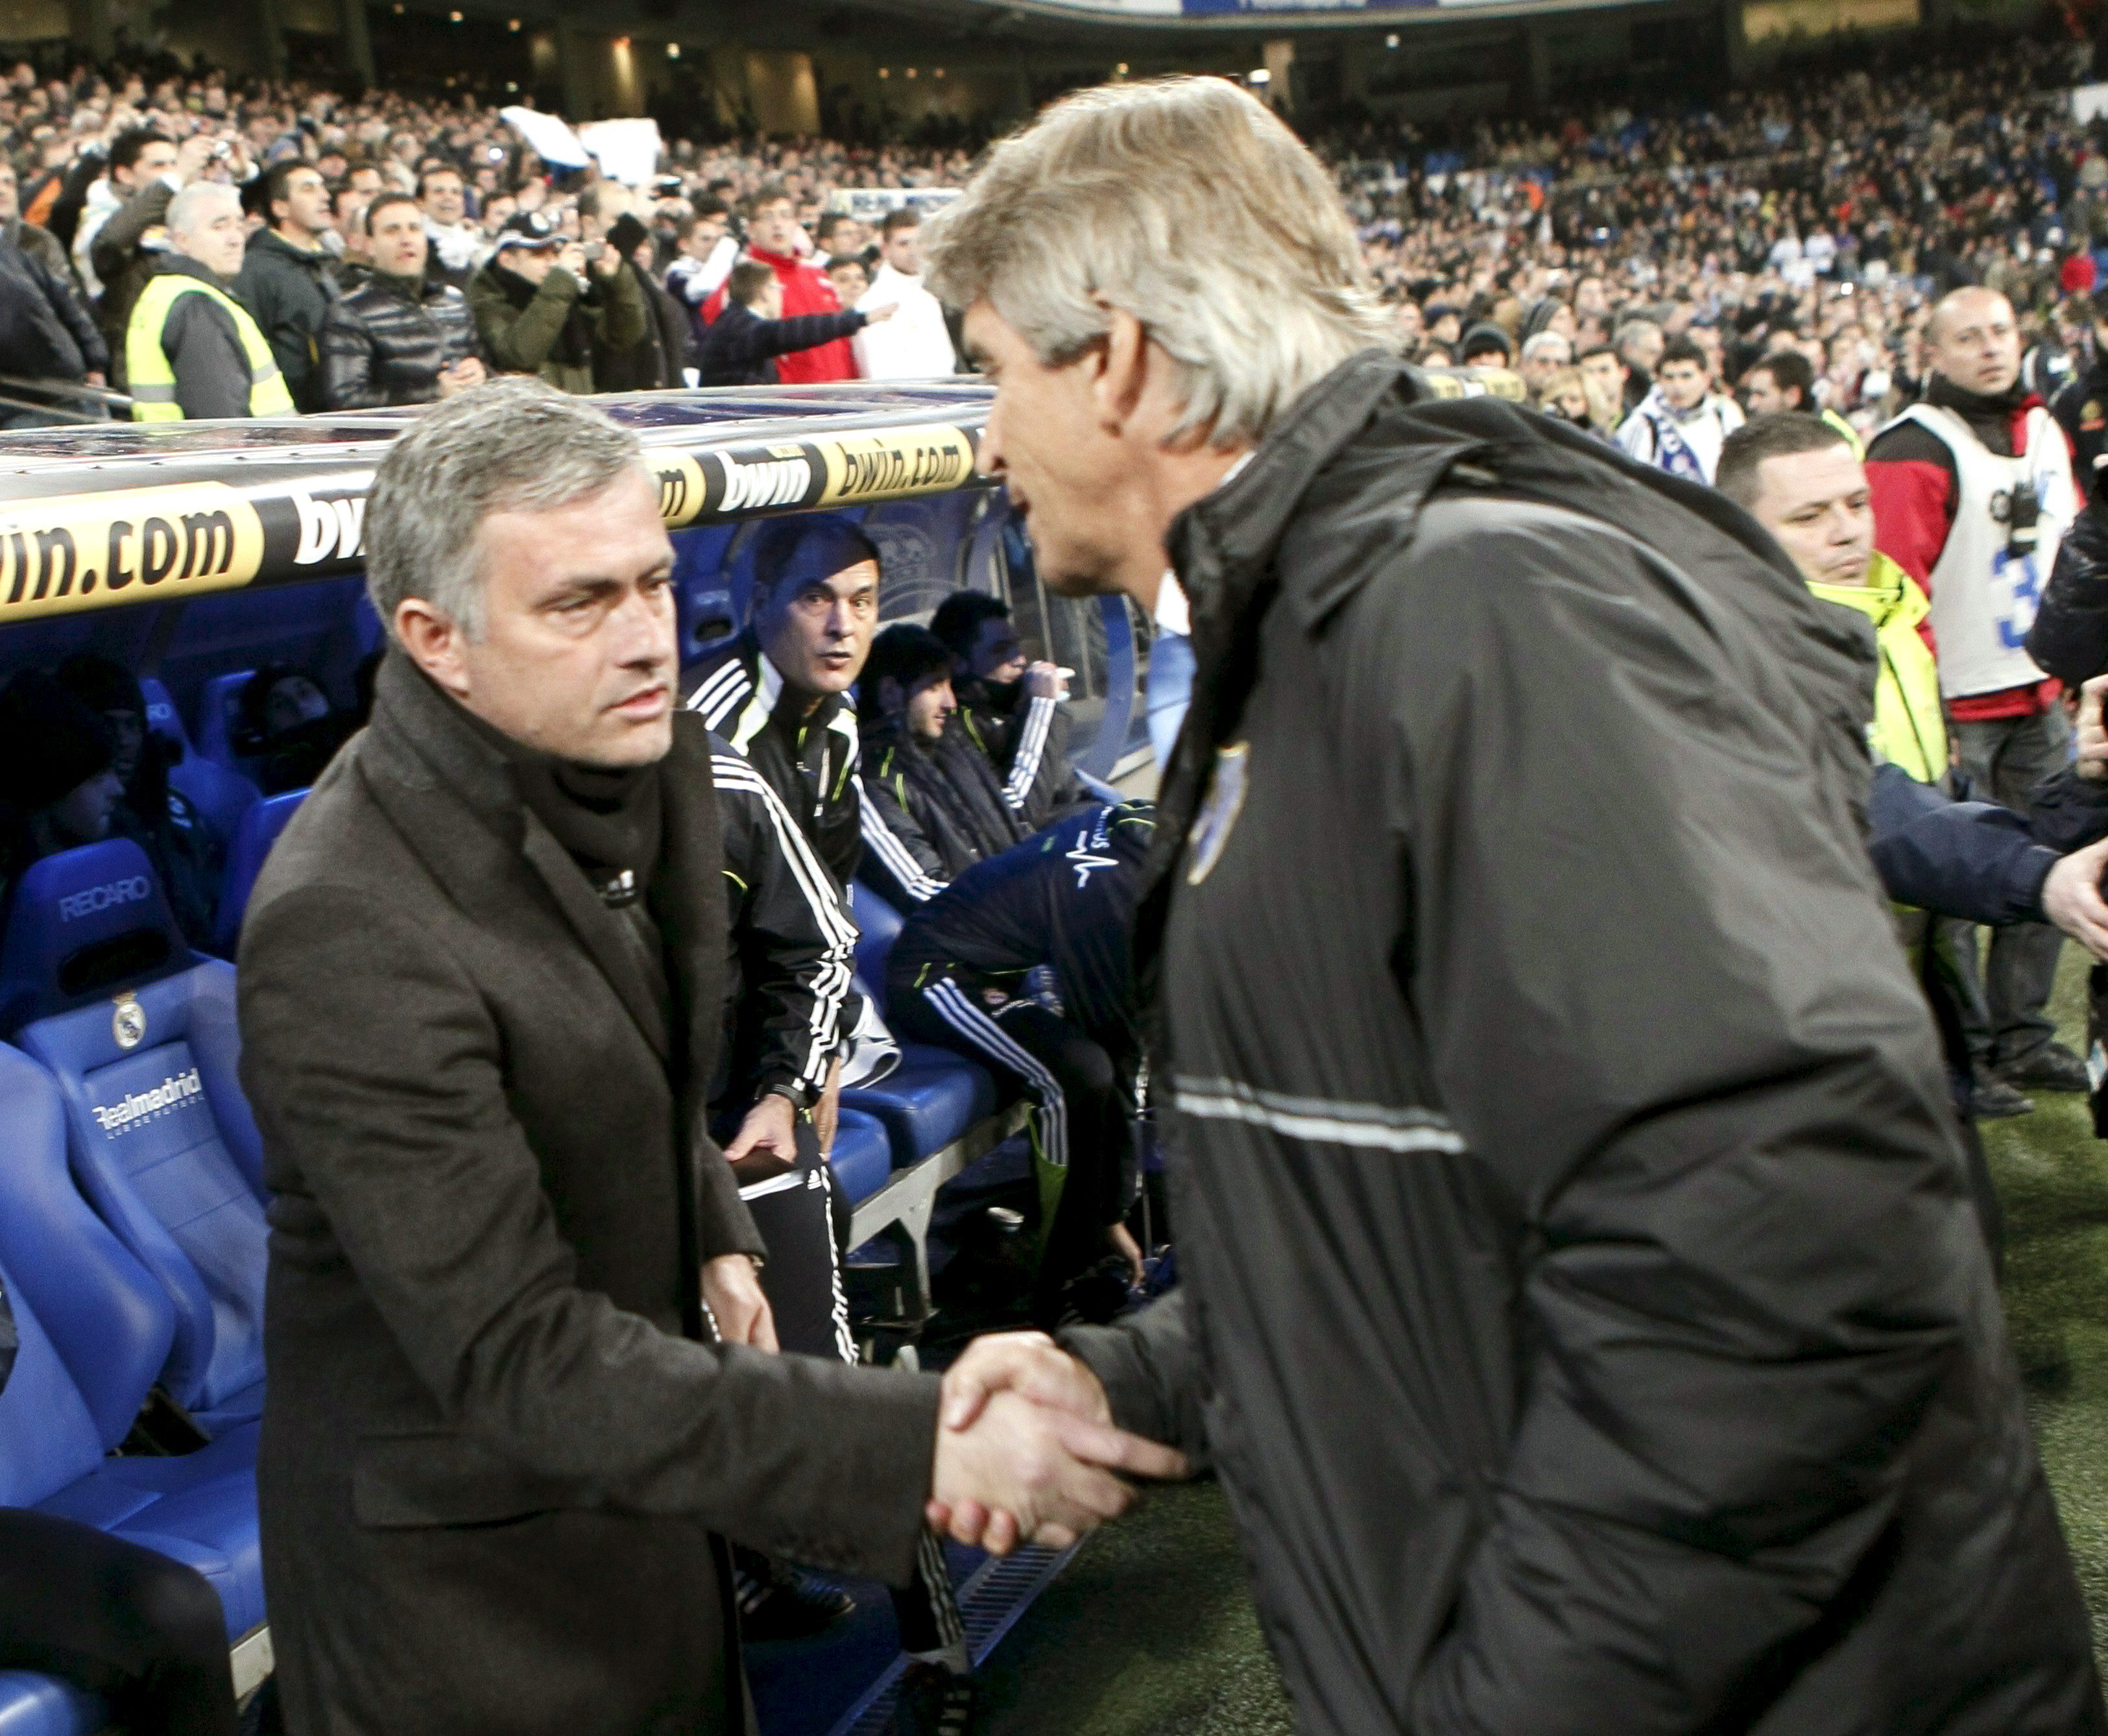 epa02613504 Malaga CF Chilean coach Manuel Pellegrini (R) shakes hands with Real Madrid's Portuguese coach Jose Mourinho (L) prior to the Spanish Primera Division soccer match between Real Madrid and Malaga CFplayed at the Santiago Bernabeu stadium in Madrid, Spain, 03 March 2011.  EPA/Paco Campos